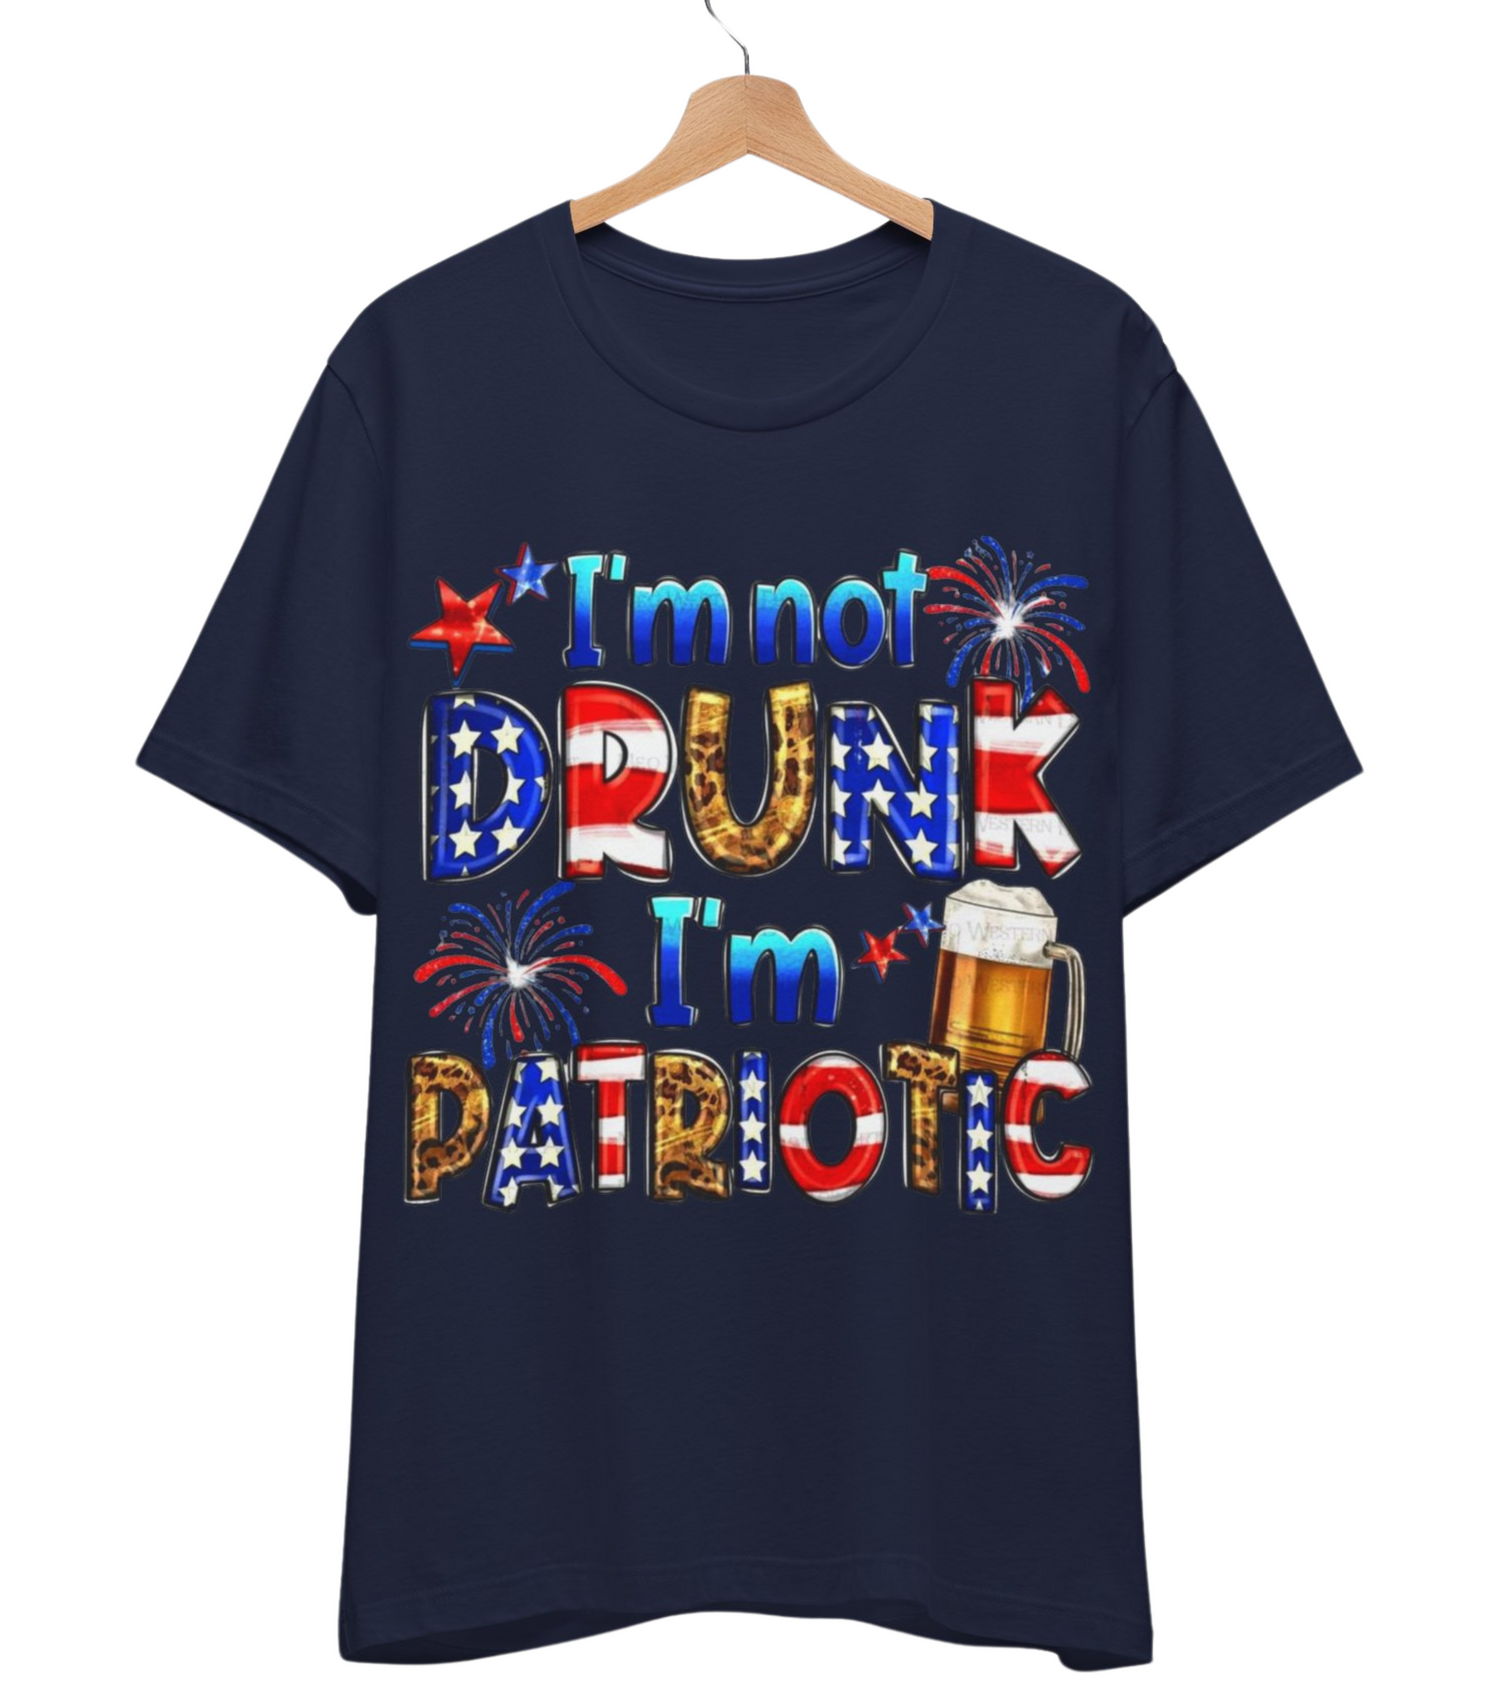 Patriotic 4th of July t-shirts”: Appeals to customers seeking festive apparel.